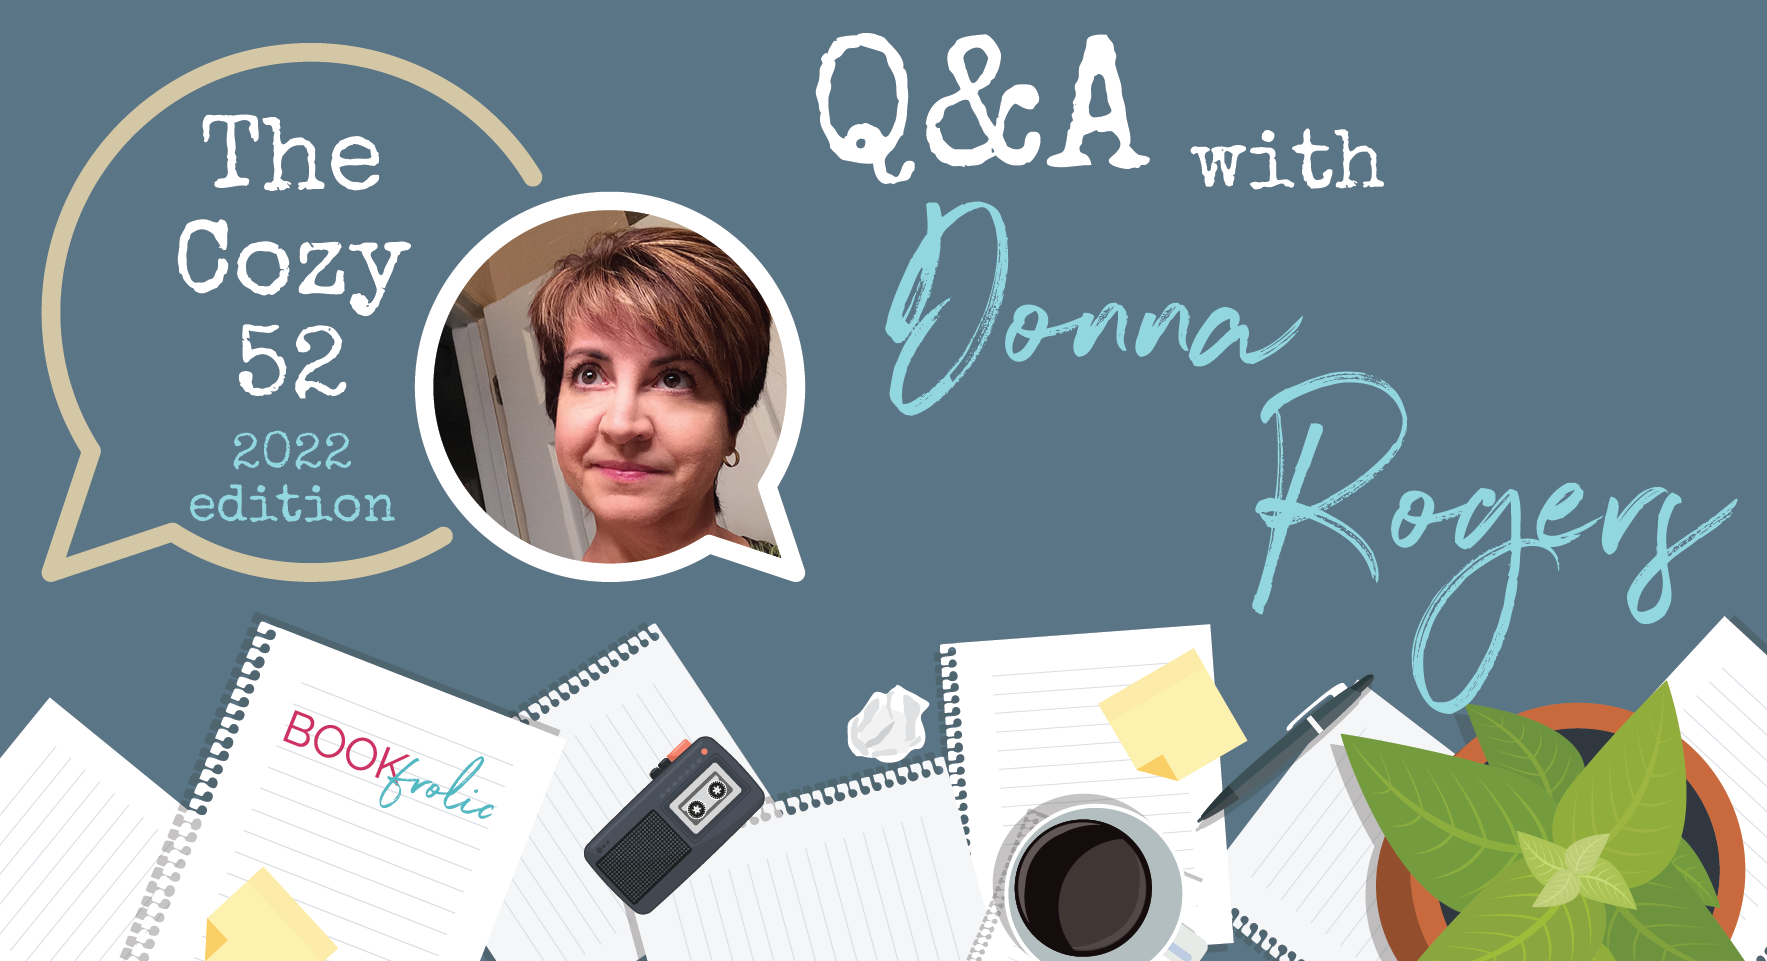 The Cozy 52 Q&A with Donna Rogers